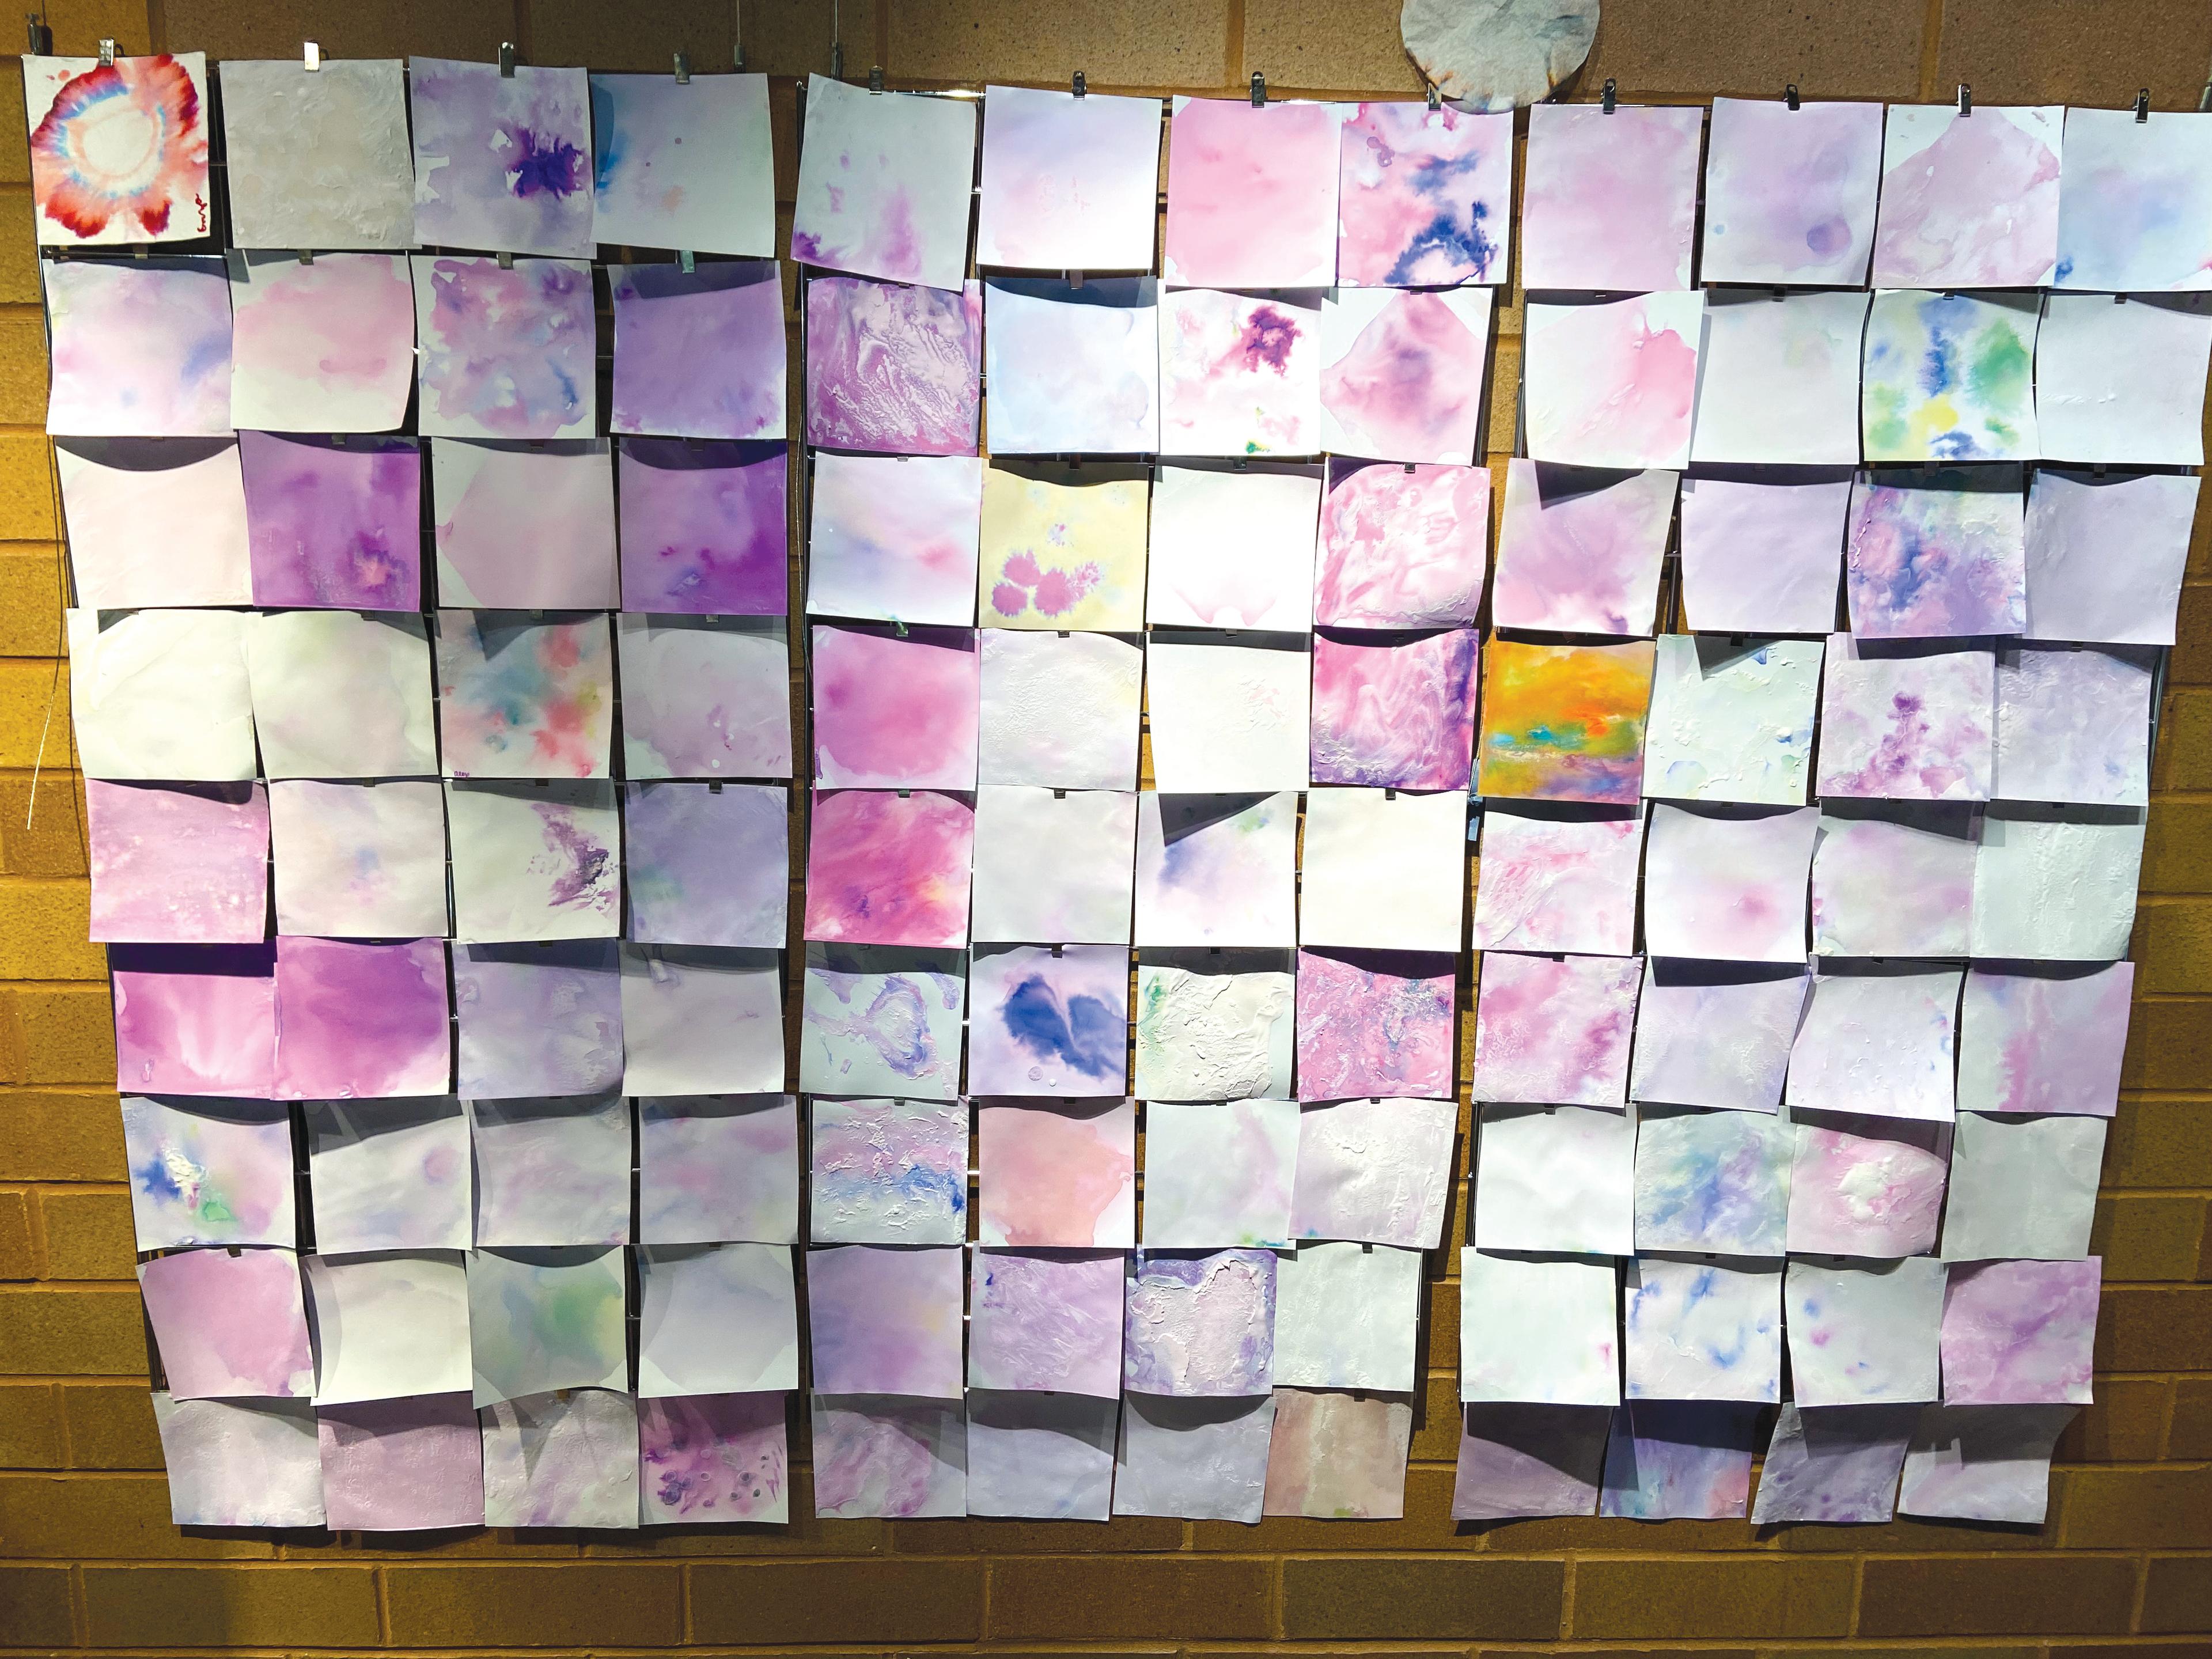 Community artwork was created as part of The Artchemist Project, an interdisciplinary mix of art and chemistry.